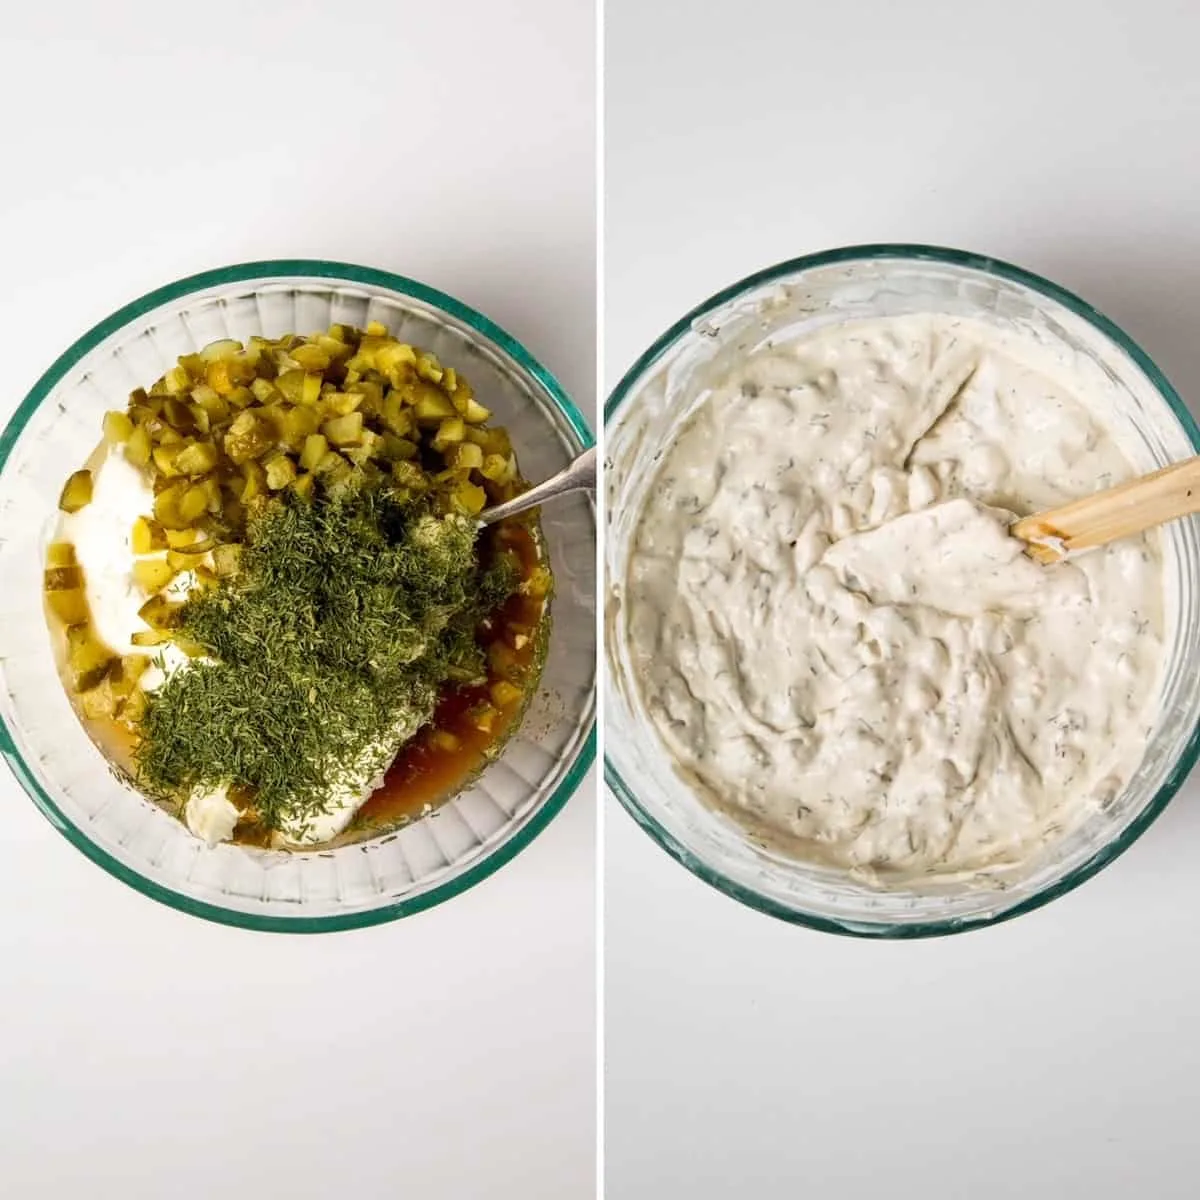 Side by side photos of dip ingredients in a bowl on the left and then mixed together on the right.